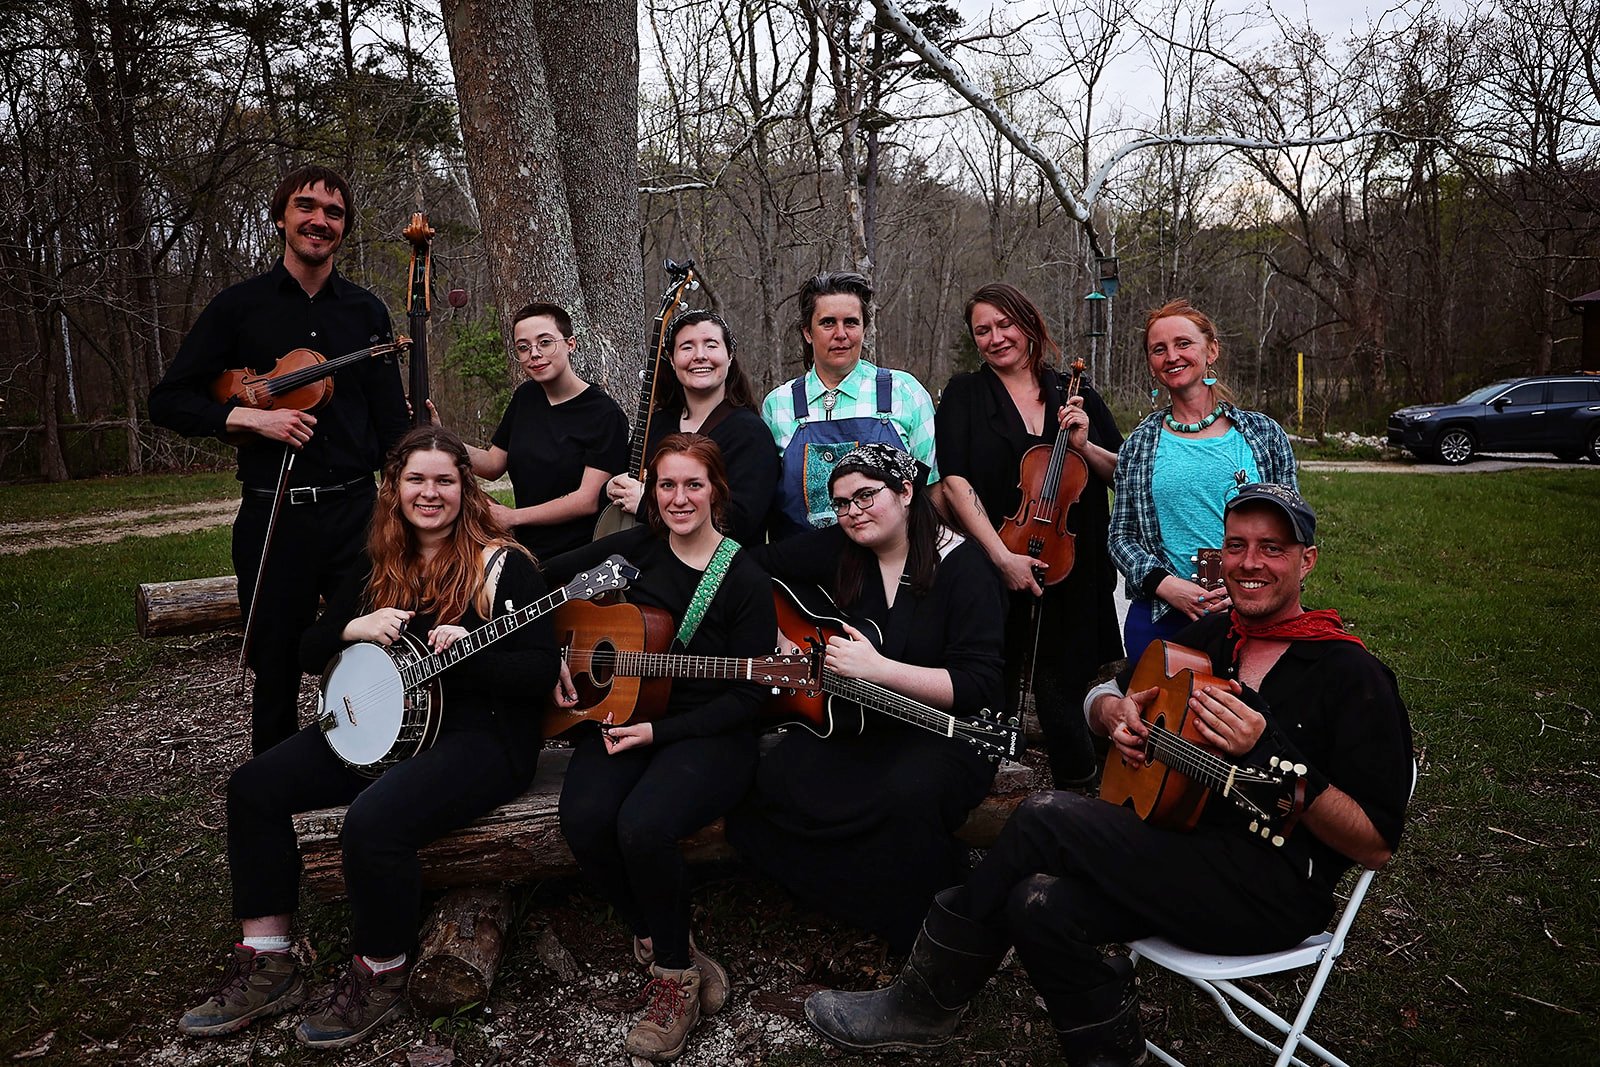  Singers &amp; musicians of Ezell: Ballad of a Land Man. Nicole Garneau, Faye Adams-Eaton, Anna Herrod, Cory Shenk, Sam Gleaves, and the Berea College Bluegrass Band, Berea College Forestry Center, March 2022. Photo: Erica Chambers.      